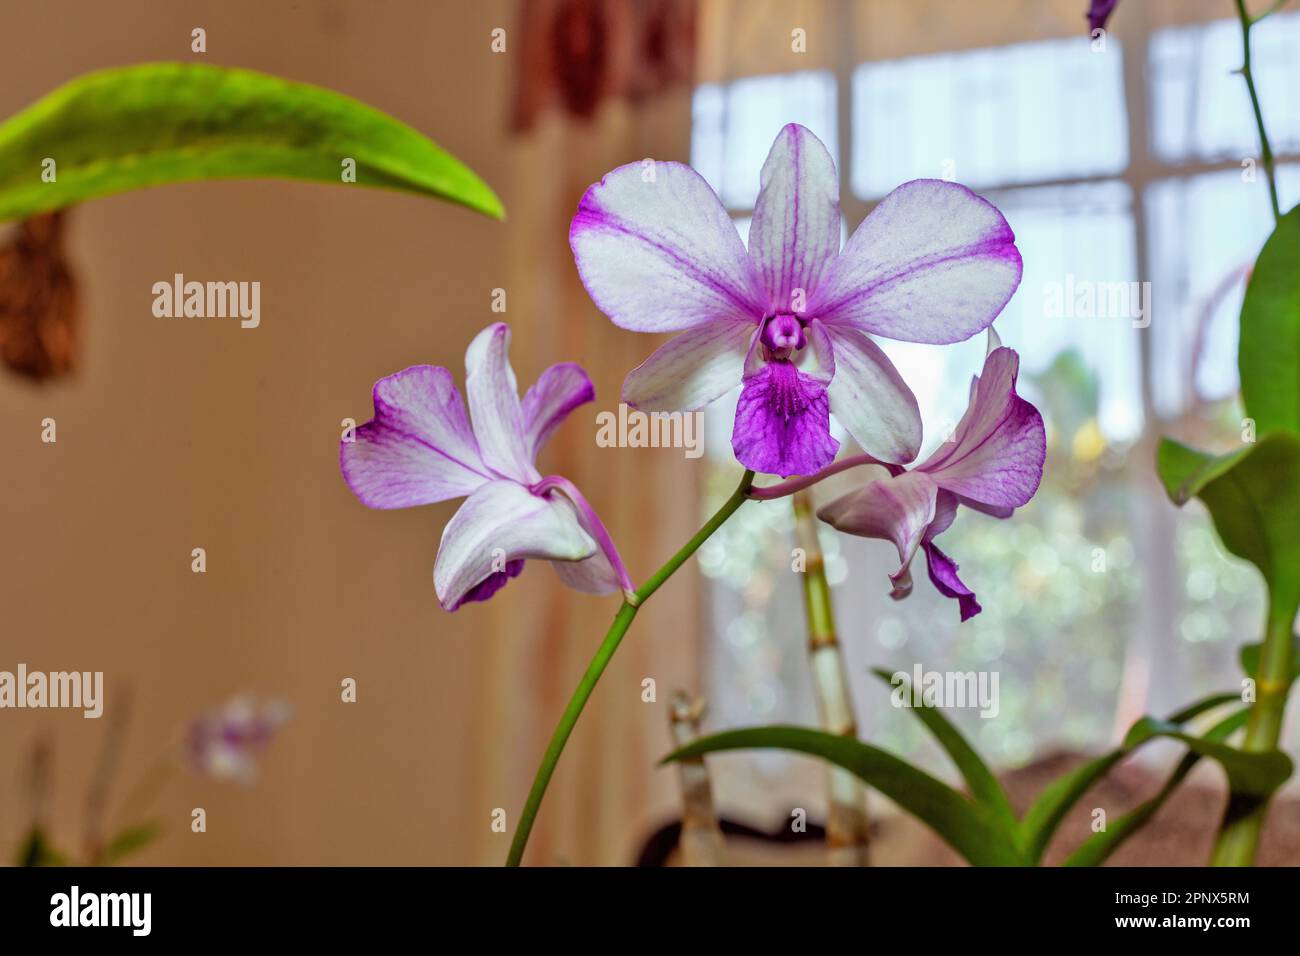 indoor growing blooming colorful orchid Stock Photo